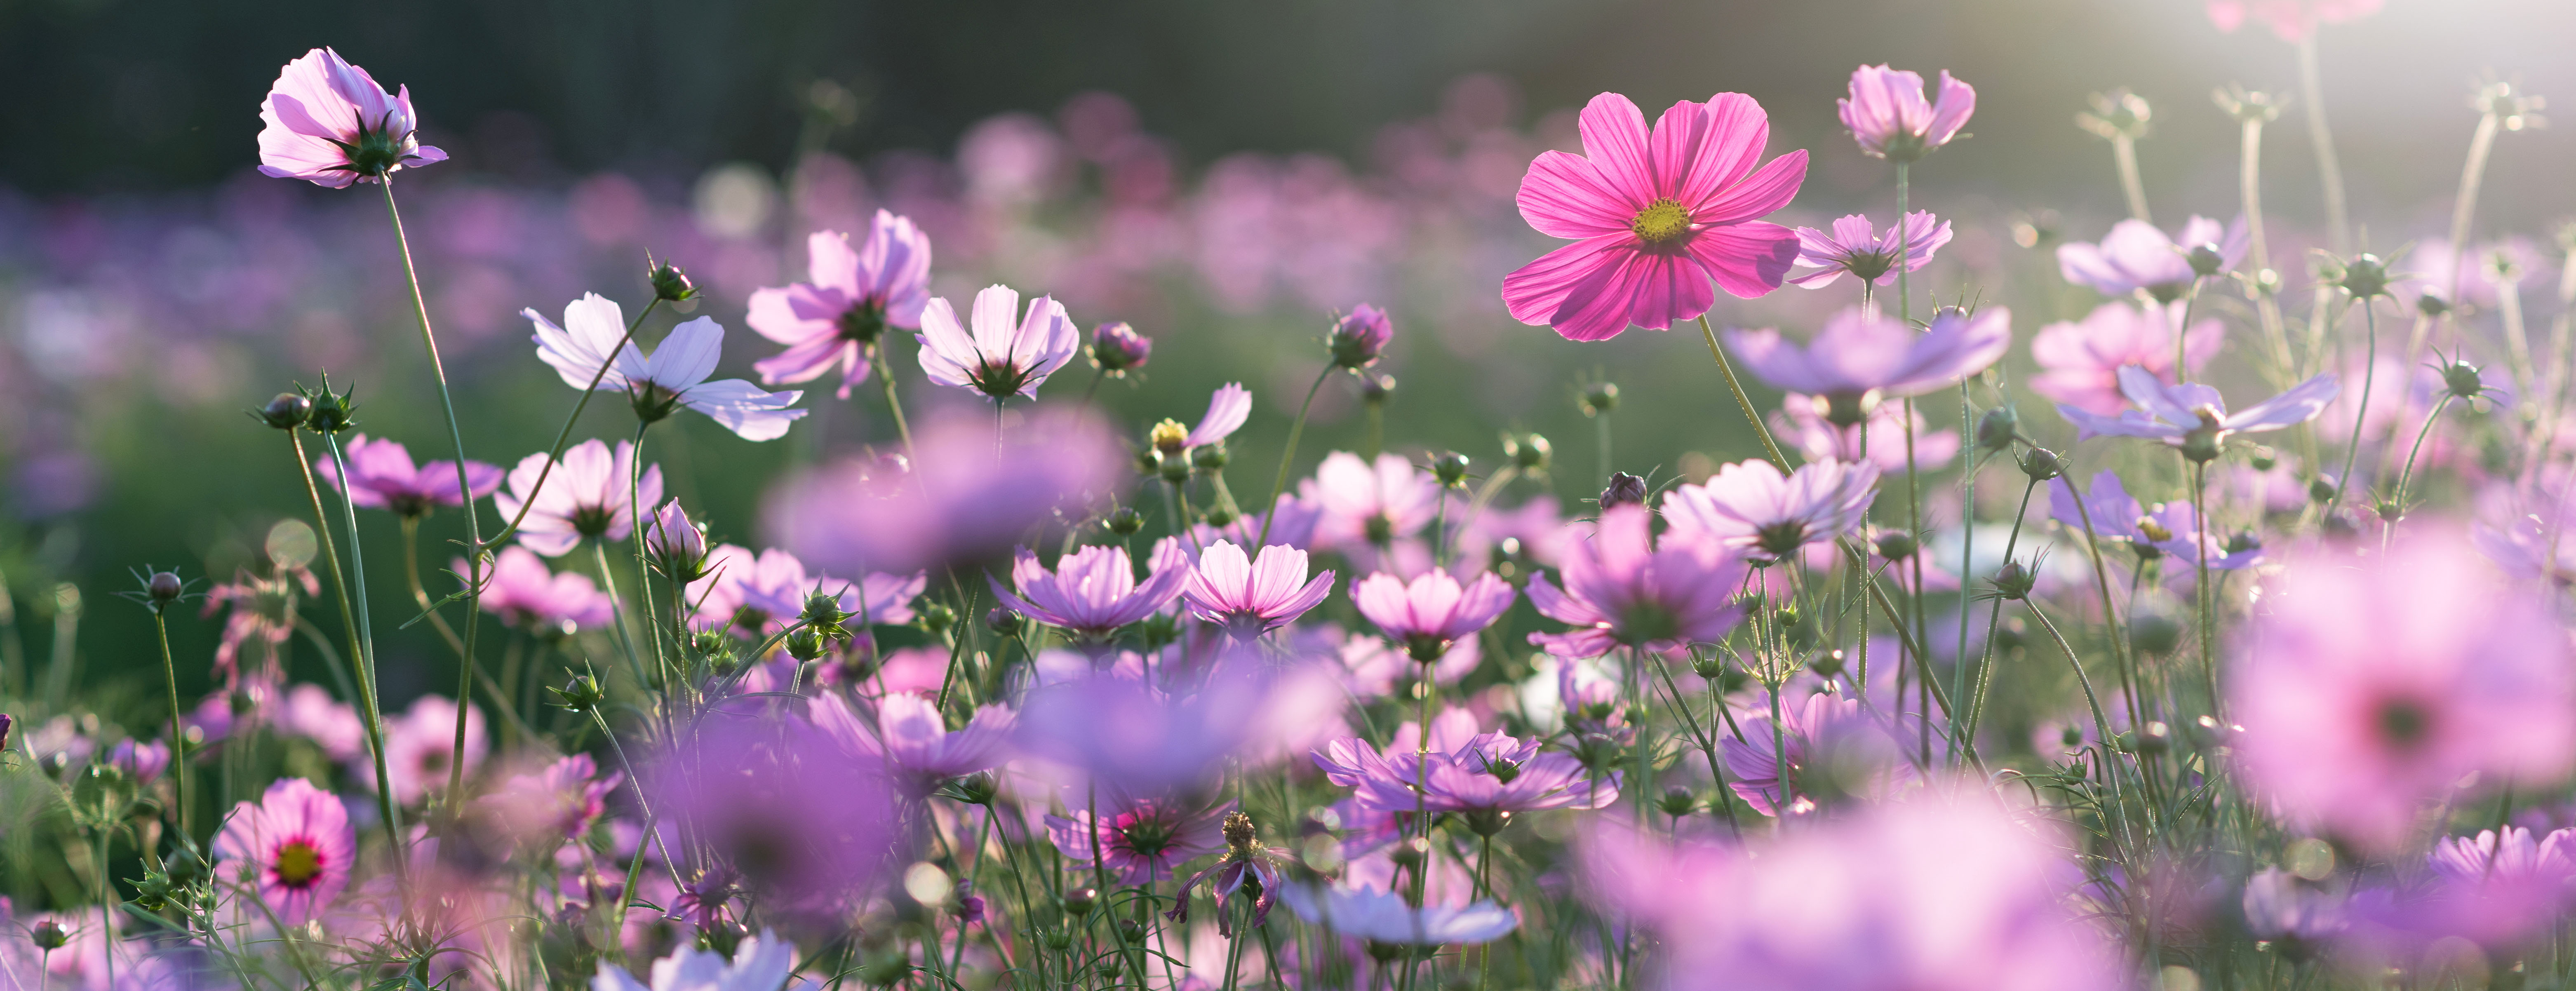 Field of purple and pink cosmo flowers